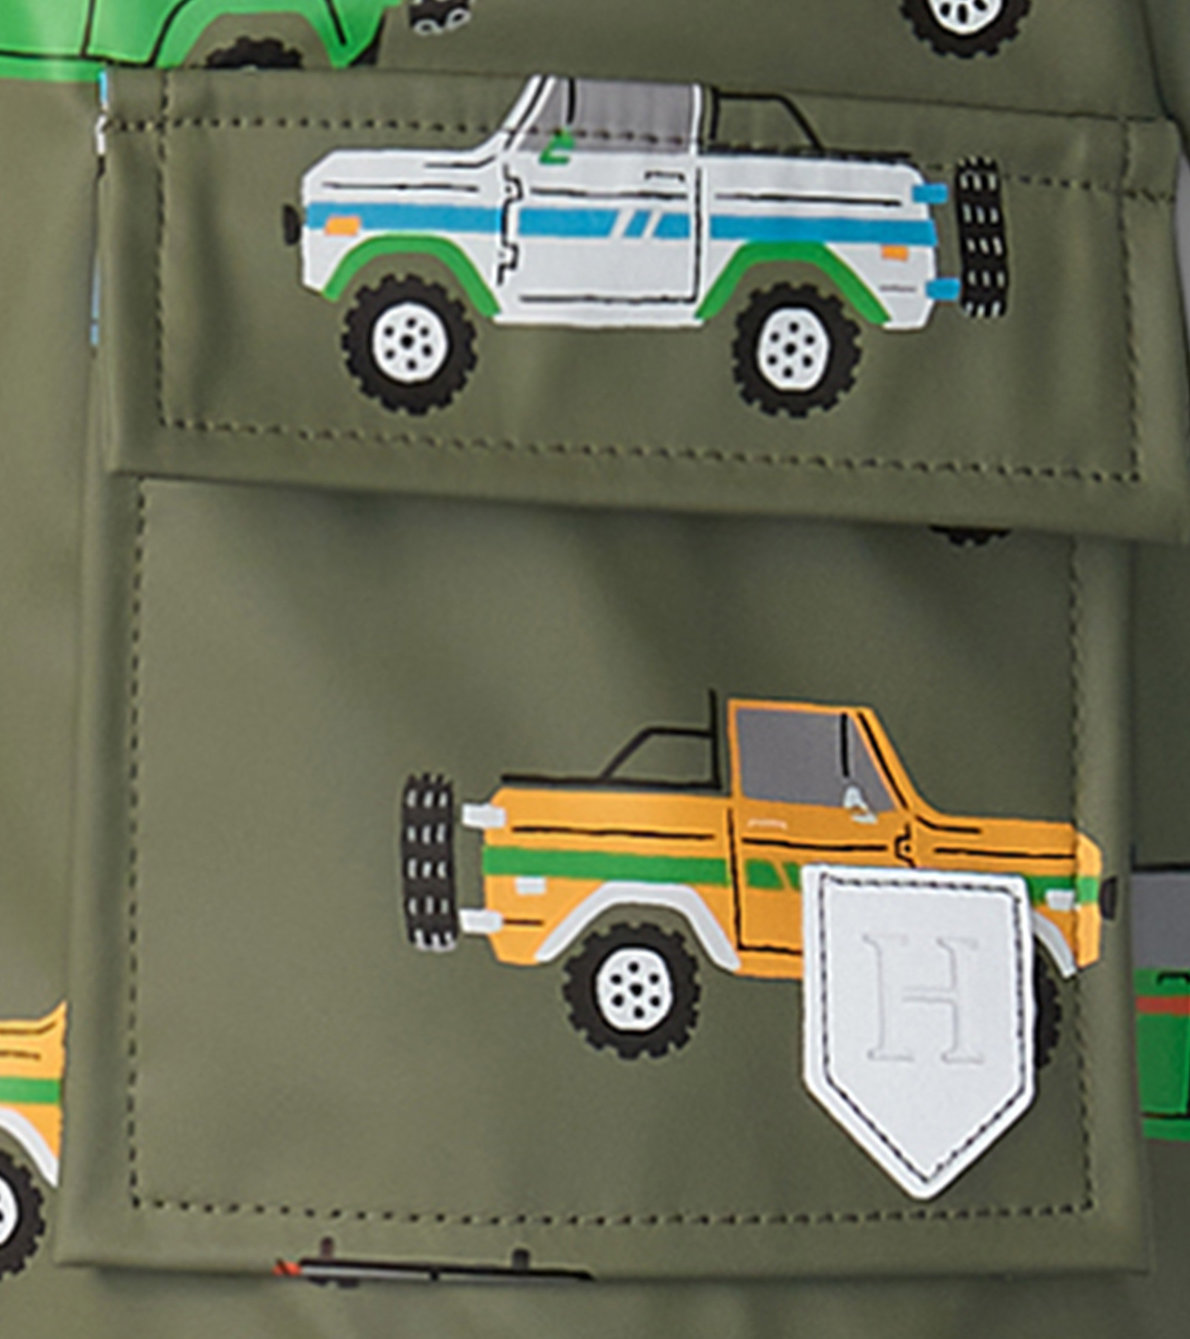 View larger image of Baby & Toddler Boys Off-Roading Button-Up Rain Jacket